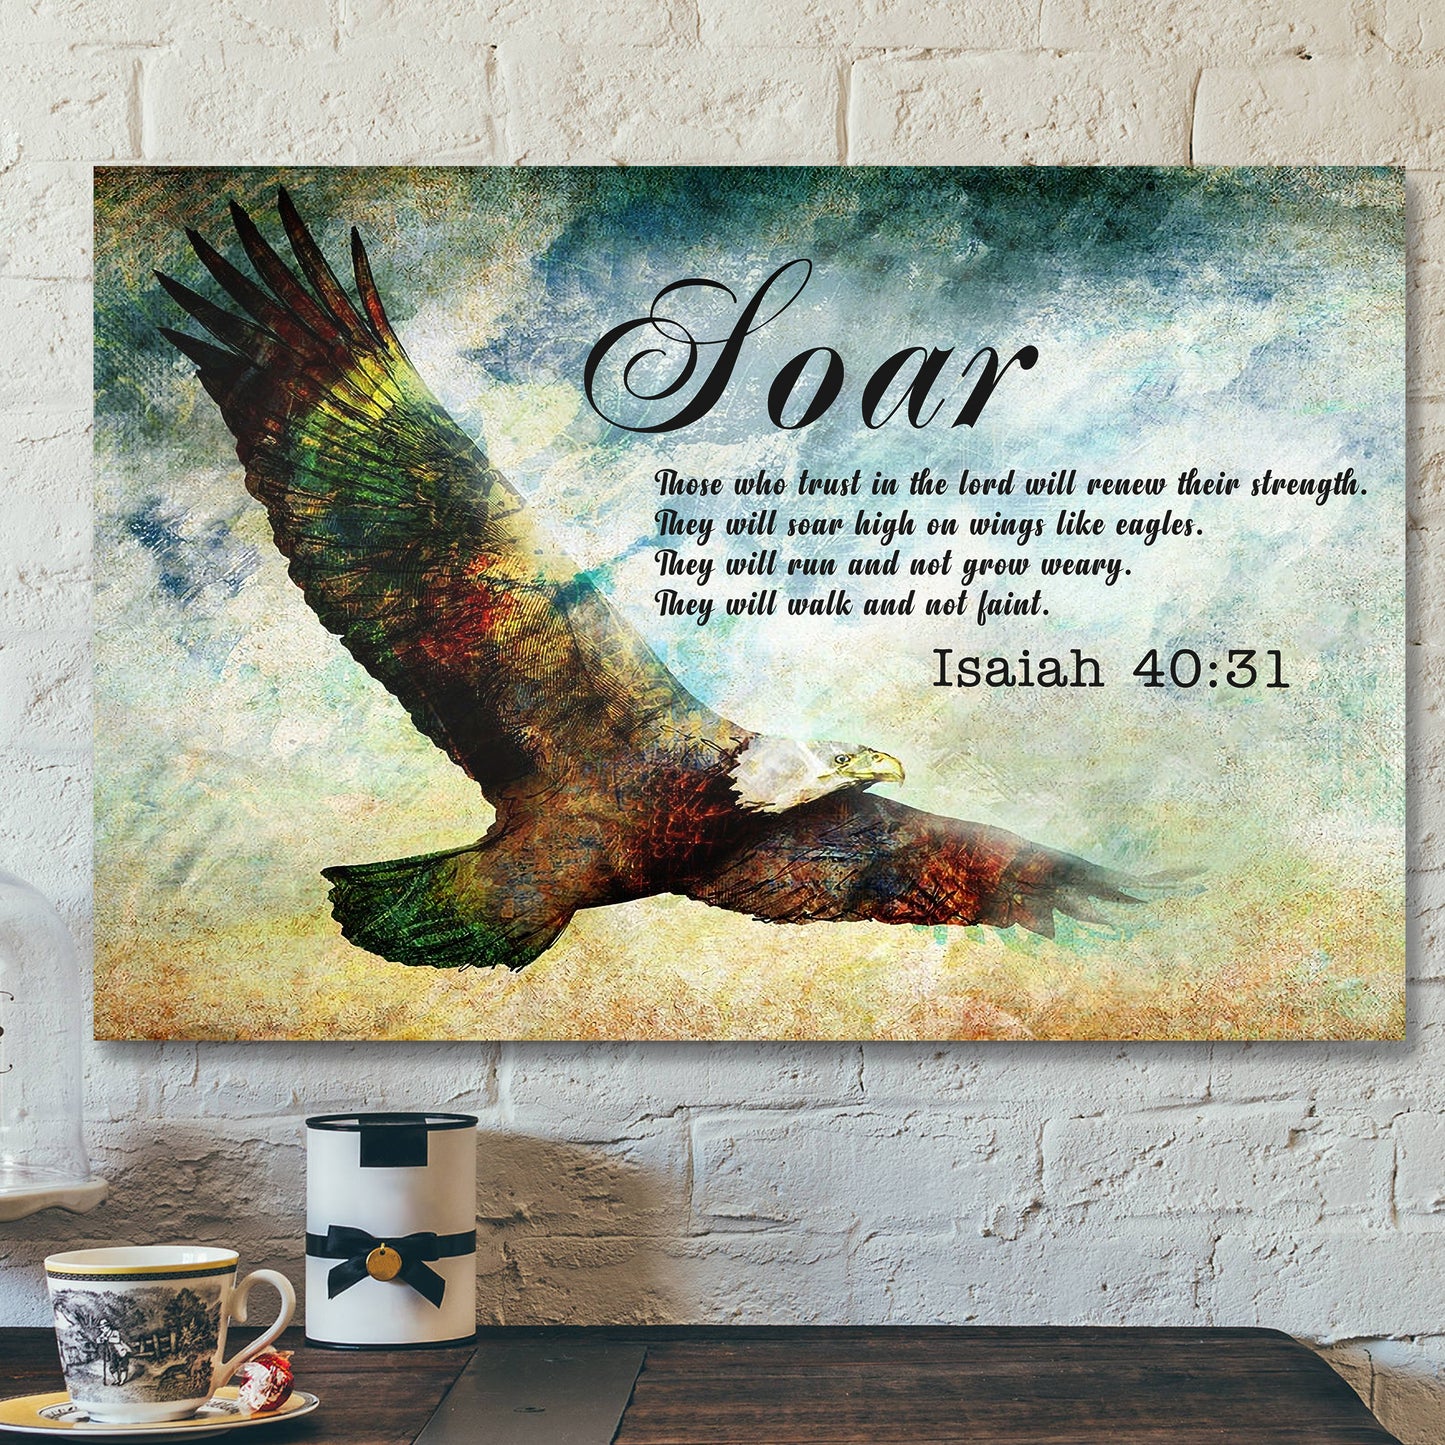 Soar On Wings Like Eagles 3 - Isaiah 40:31 - Bible Verse Canvas - Scripture Canvas Wall Art - Ciaocustom